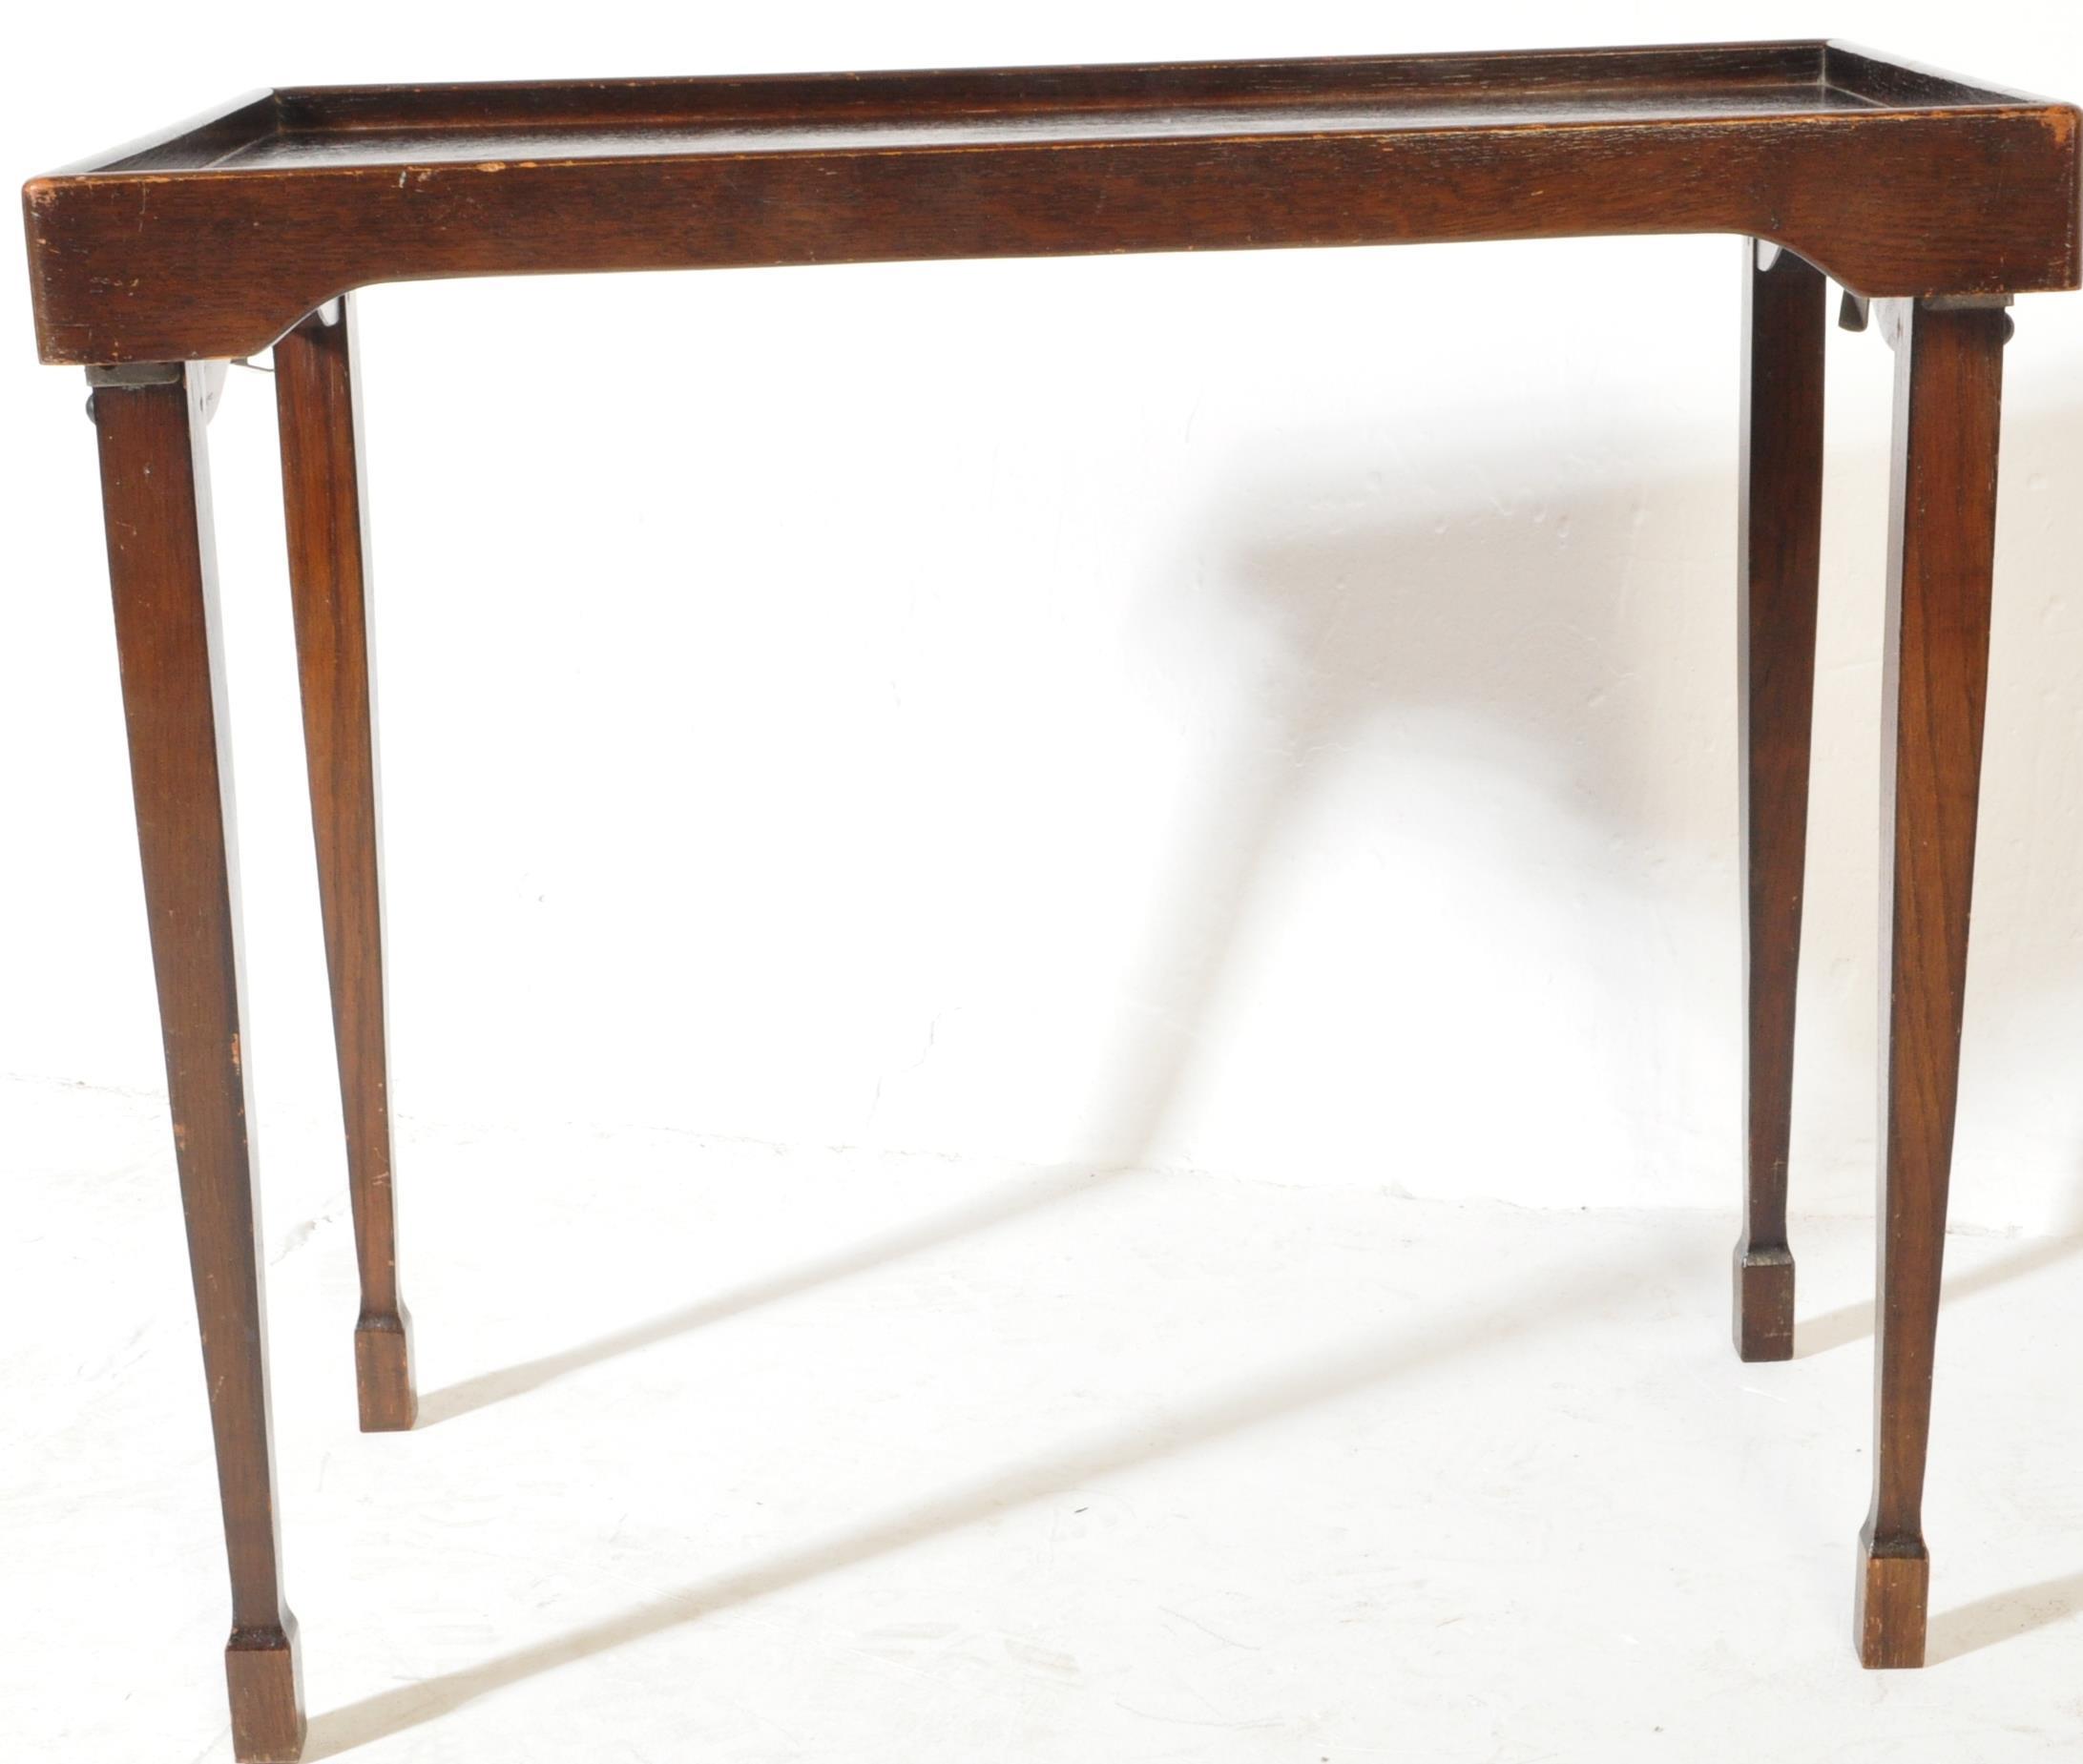 A 1940'S OAK FOLDING GALLERY TRAY TOP EDGE COACHING TABLE - Image 3 of 6